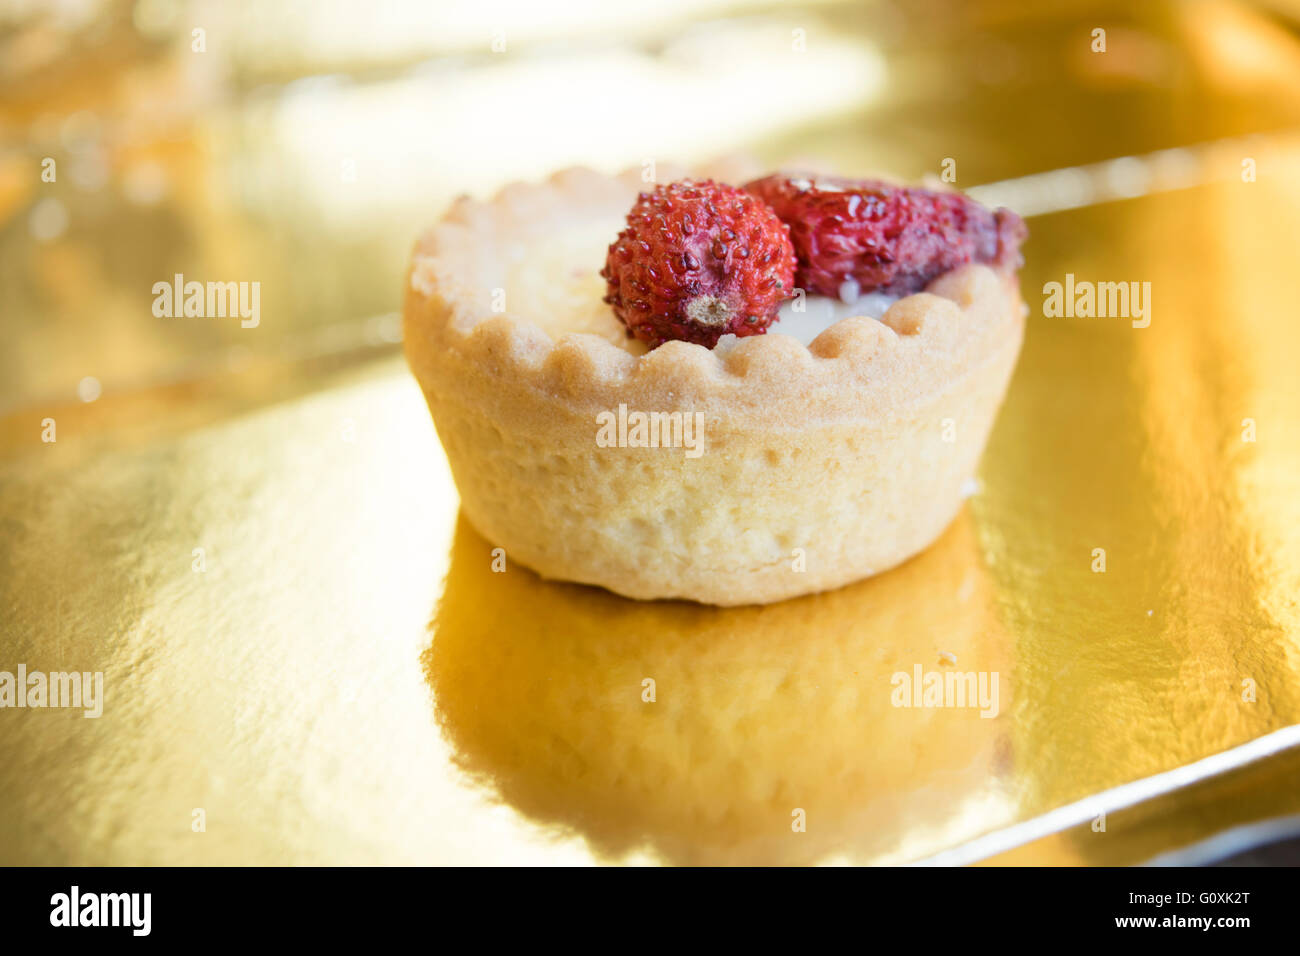 closeup of a pastry with chantilly cream and soft fruit Stock Photo